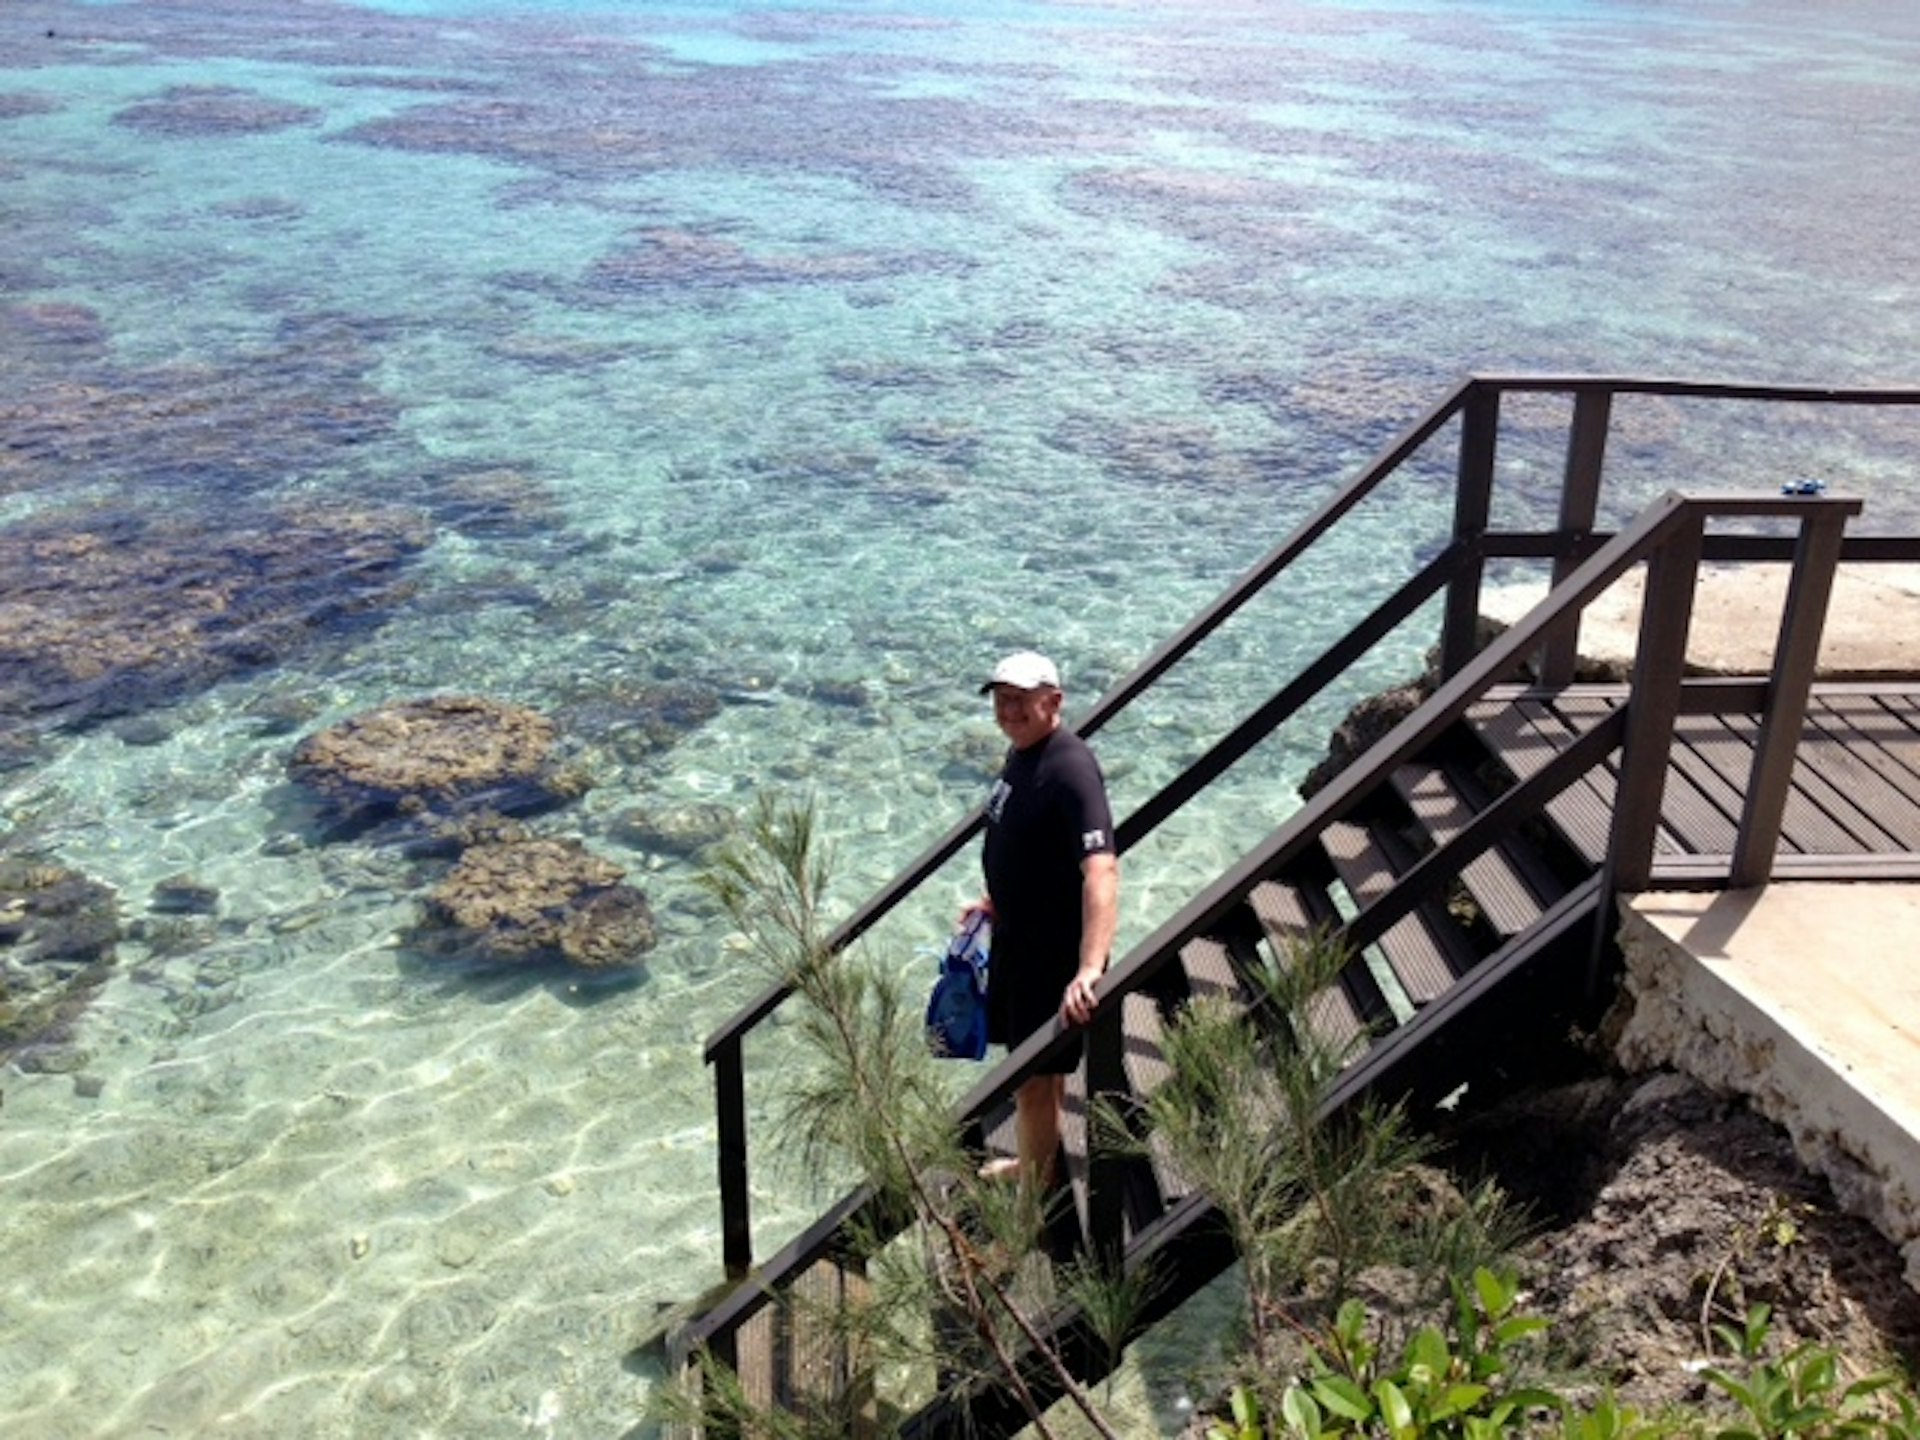 Heading into calm waters for some snorkelling © Craig McLachlan / Lonely Planet